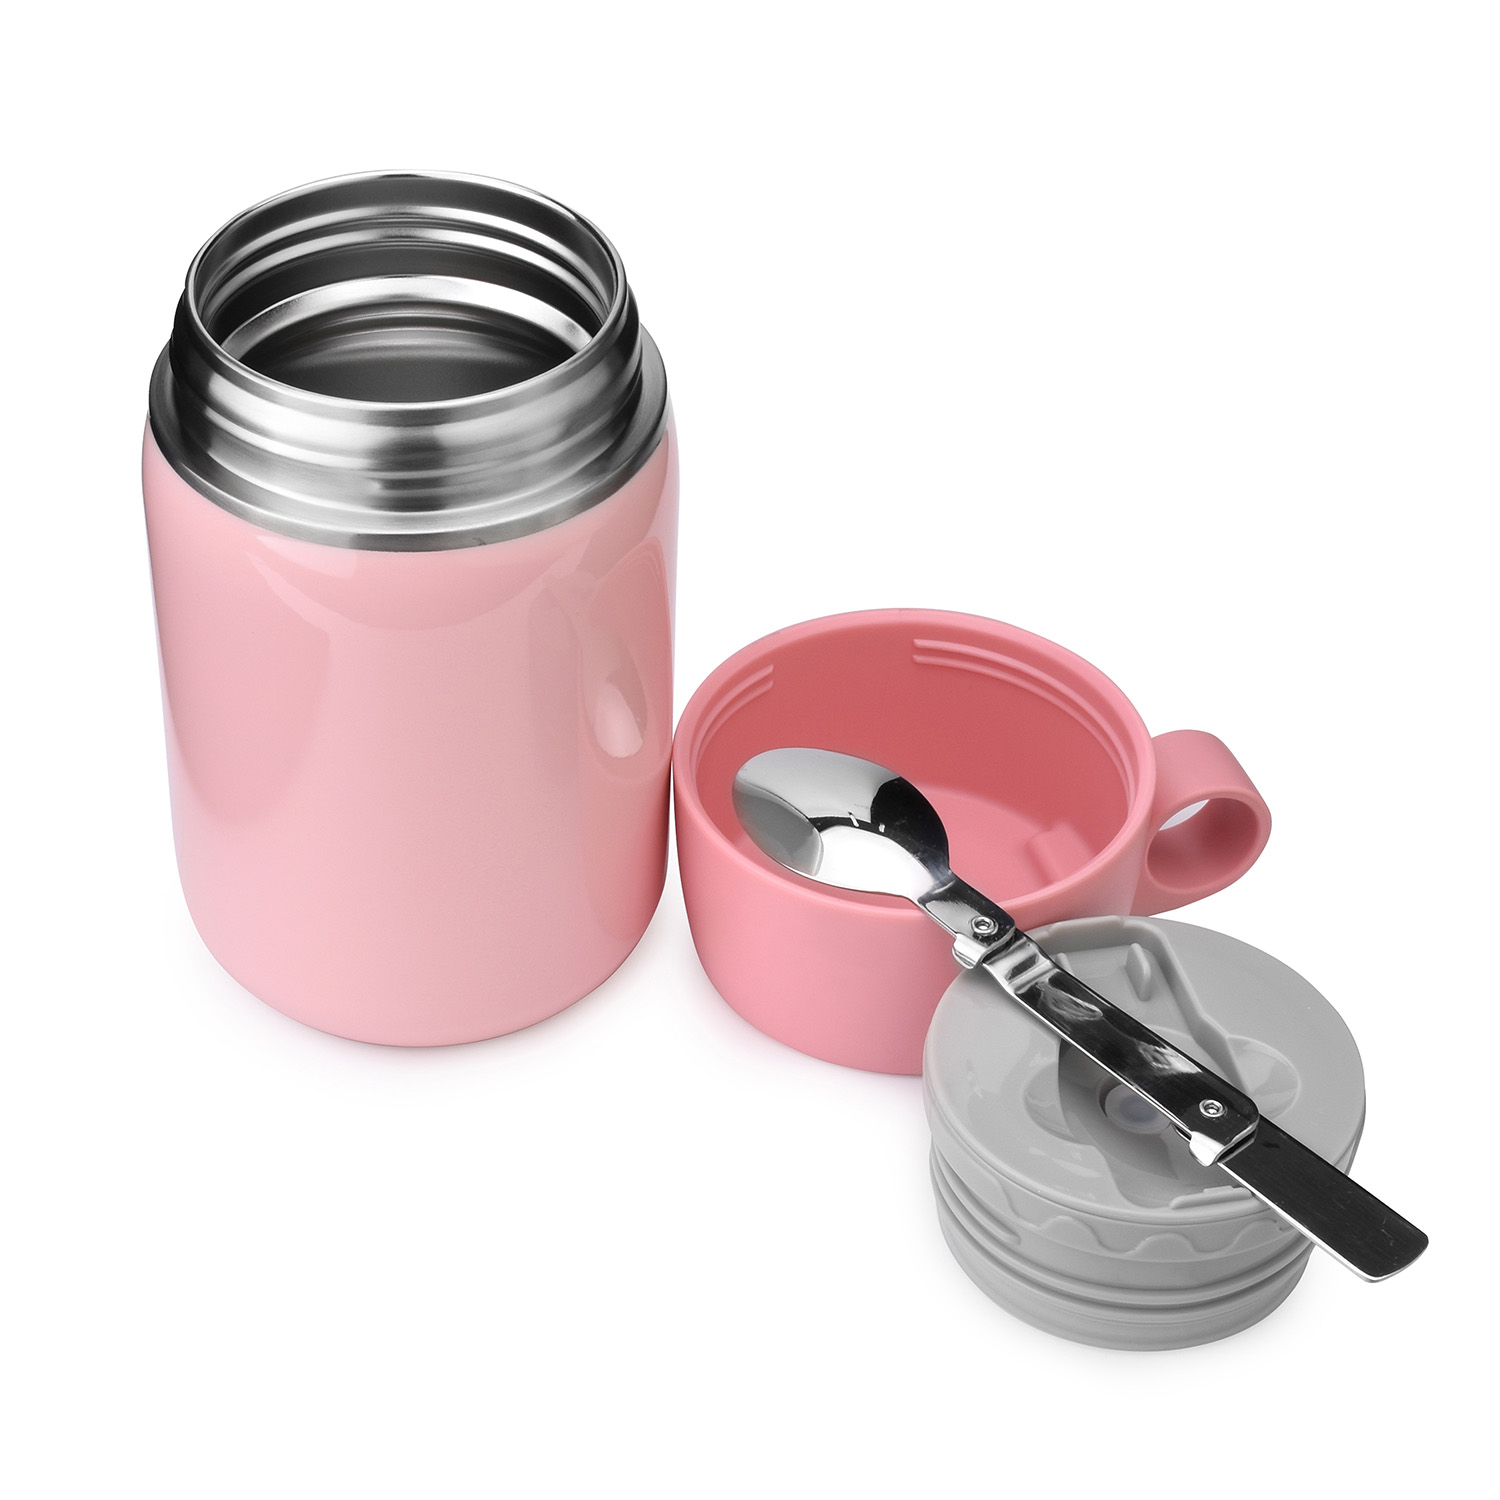 Lunch Food Jar - Vacuum Insulated Stainless Steel Soup Thermos - 400ML -  Set of 1, Leak Proof Food Jar with Spoon for Hot or Cold Food